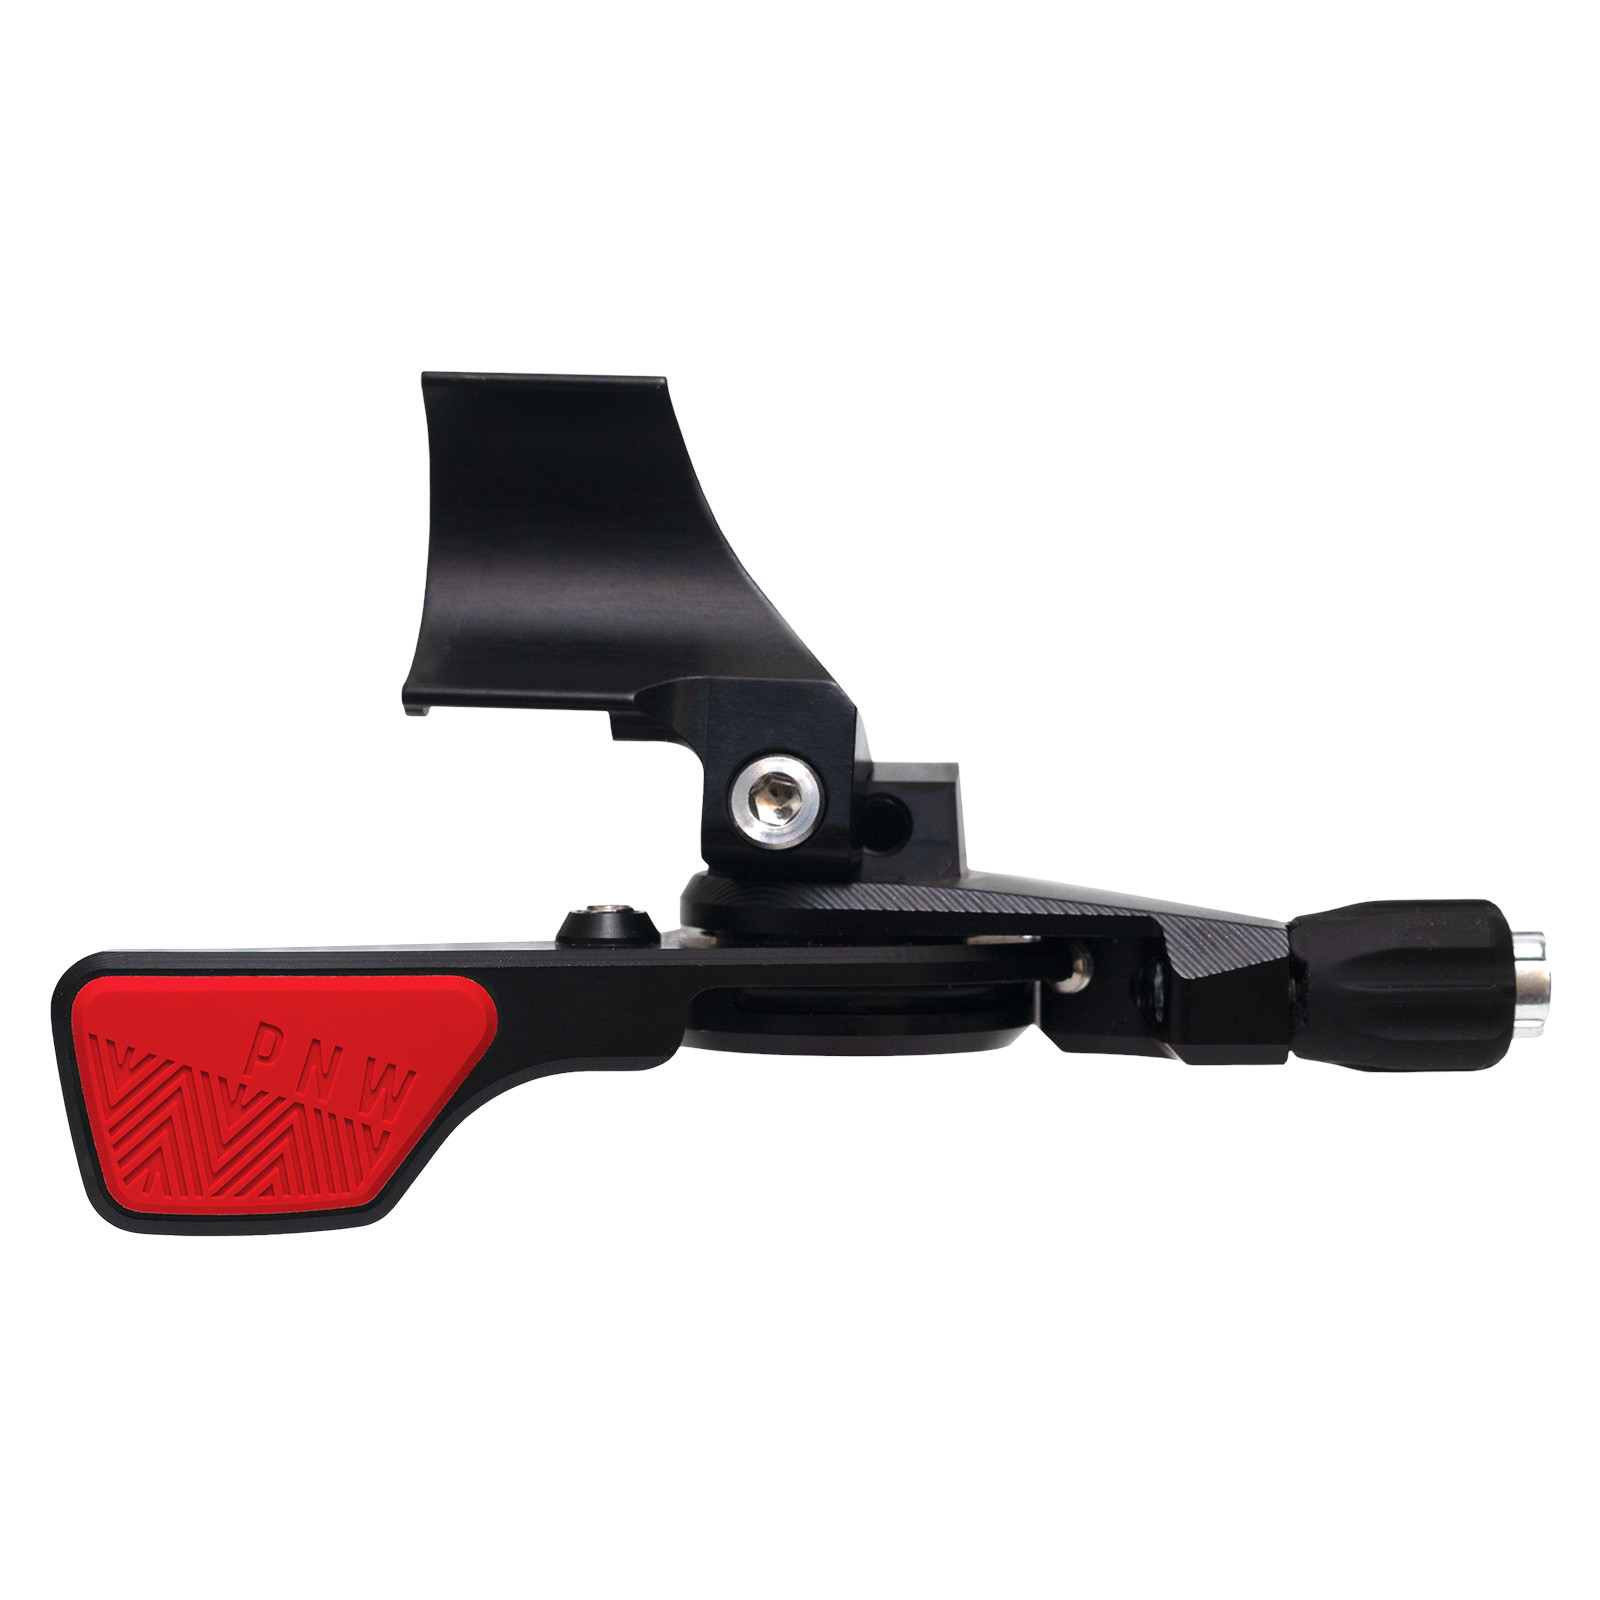 Productfoto van PNW Components Loam Remote Lever for Dropper Seatpost | I-Spec II - black/really red